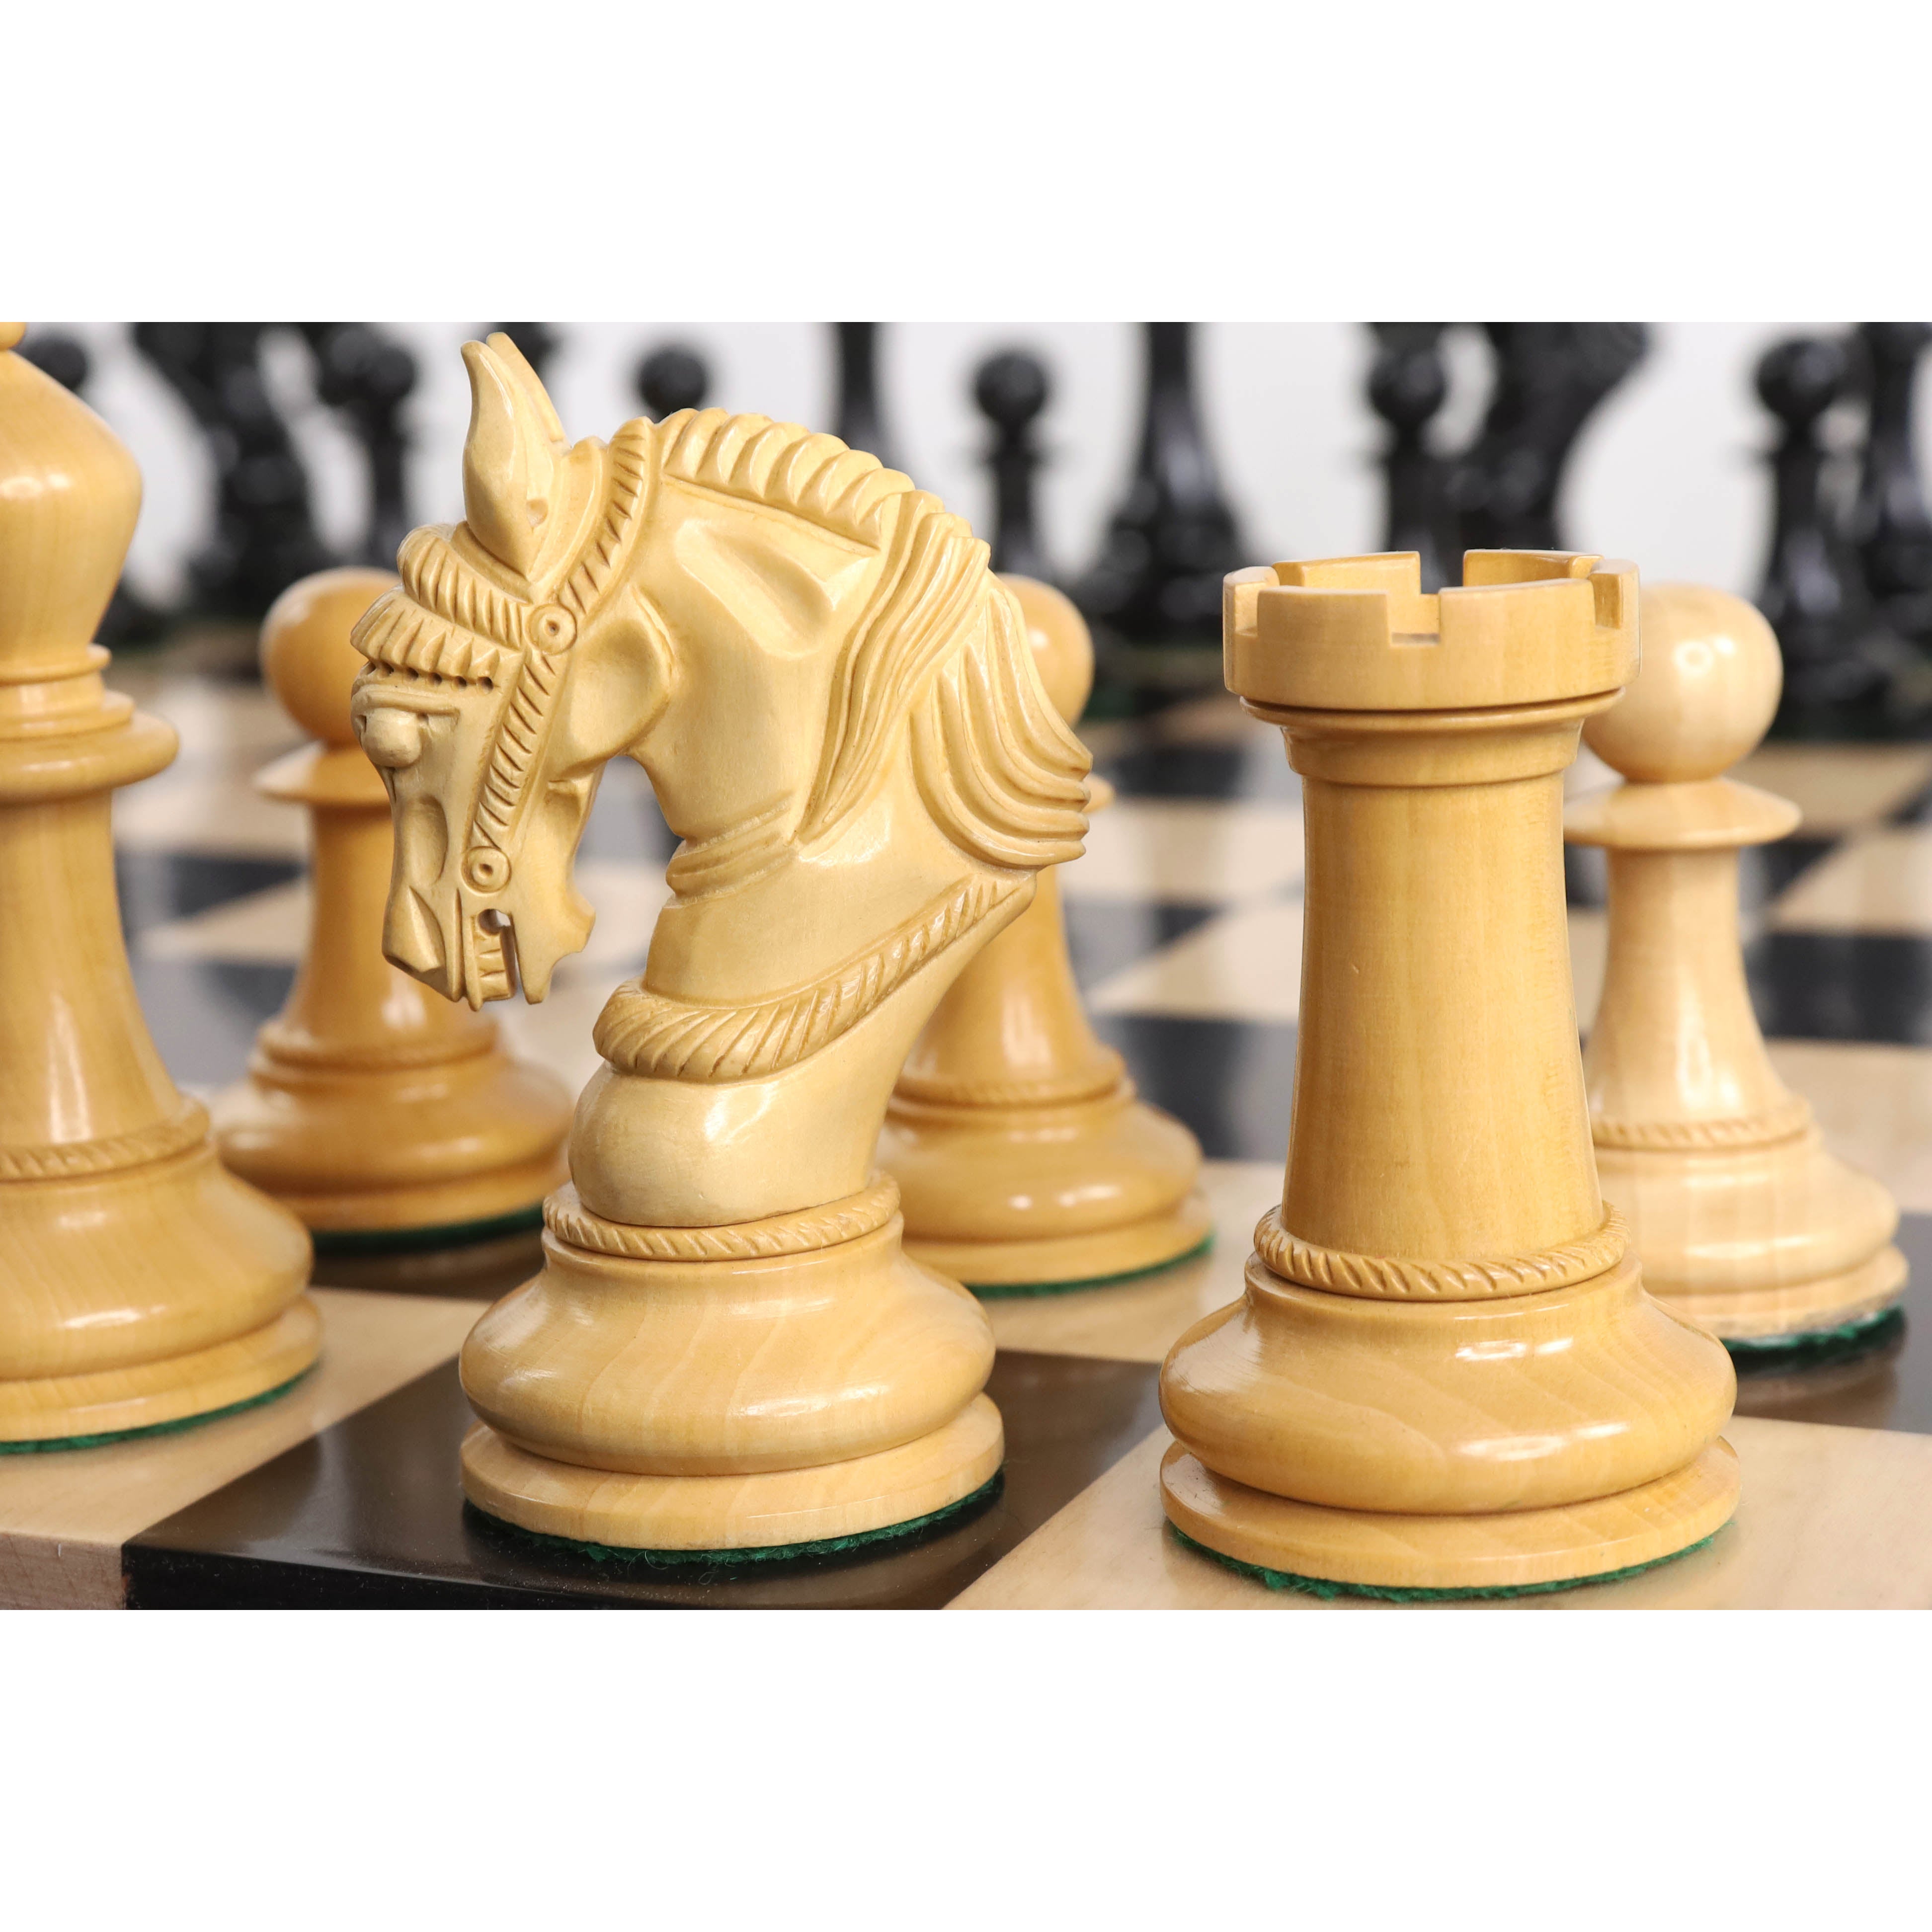 4.5 Imperator Luxury Chess Set Combo - Pieces in Ebony Wood with